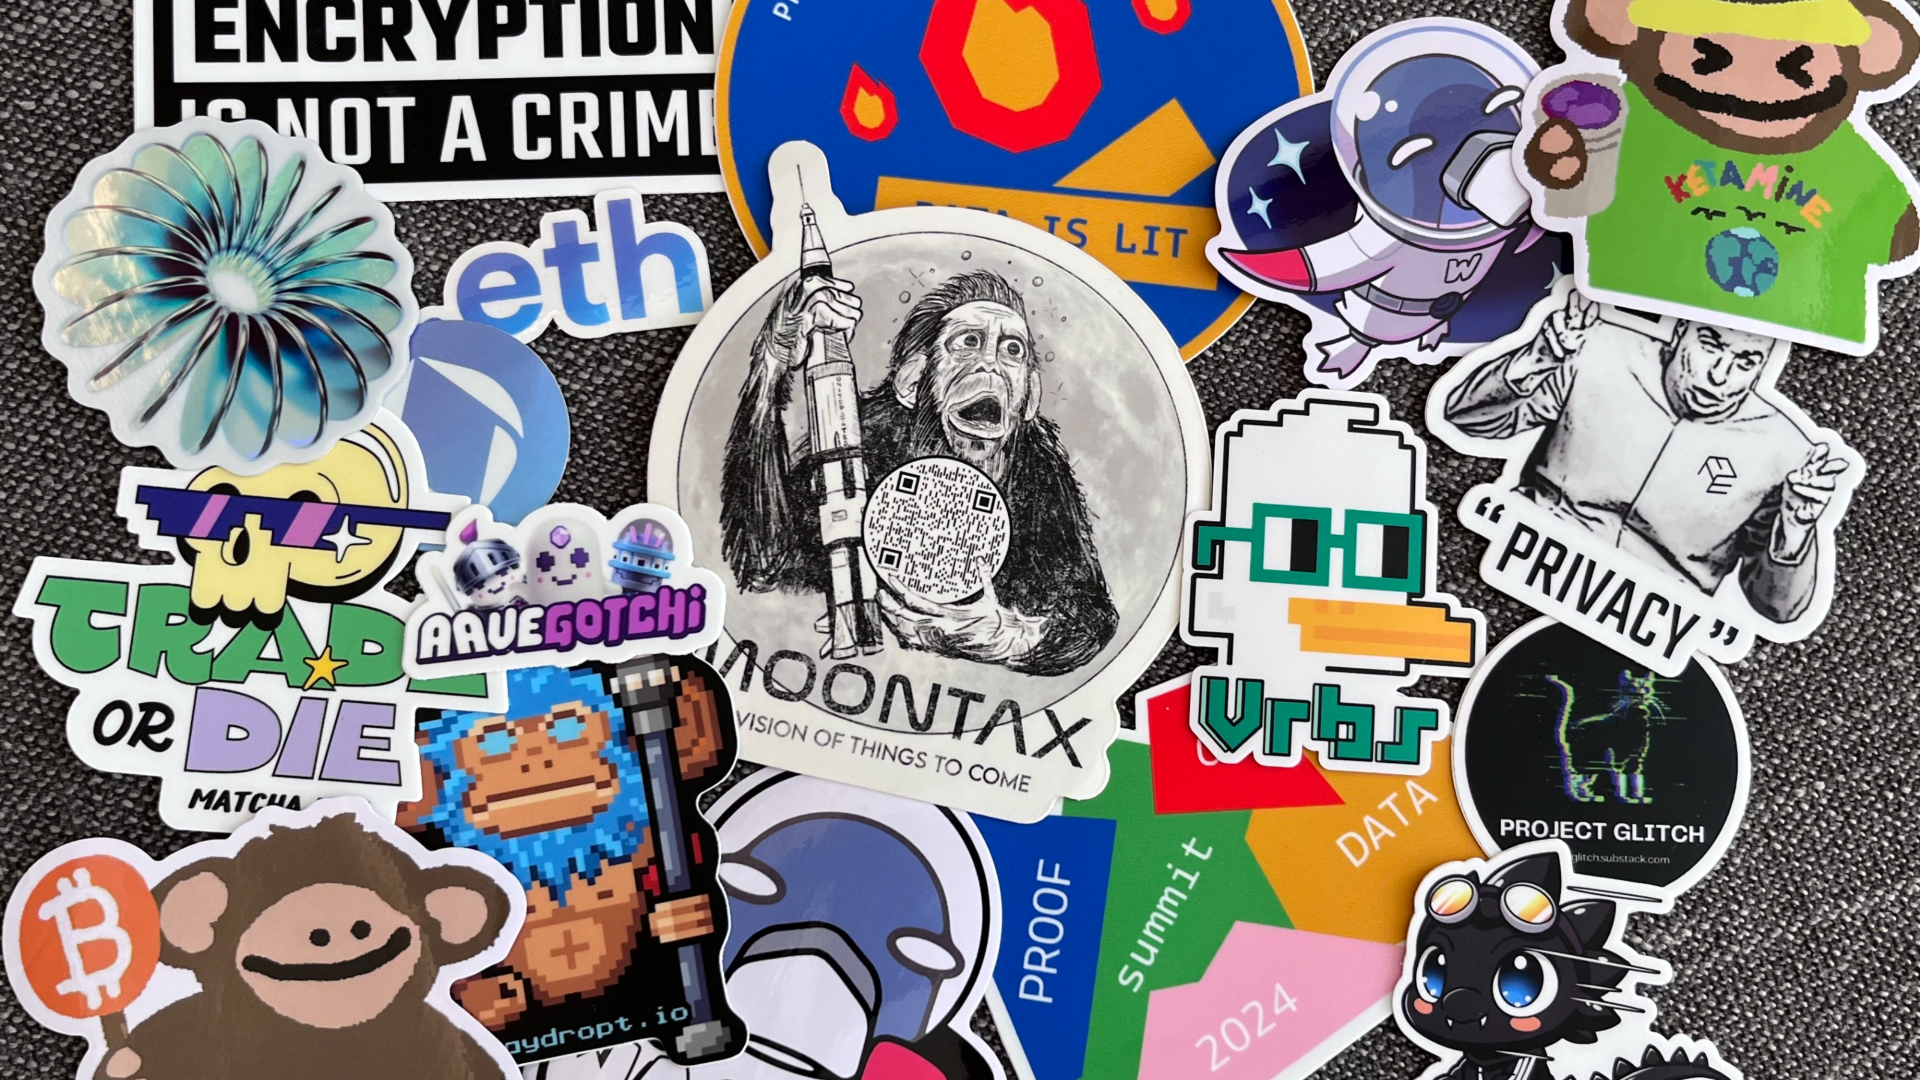 A bunch of crypto stickers